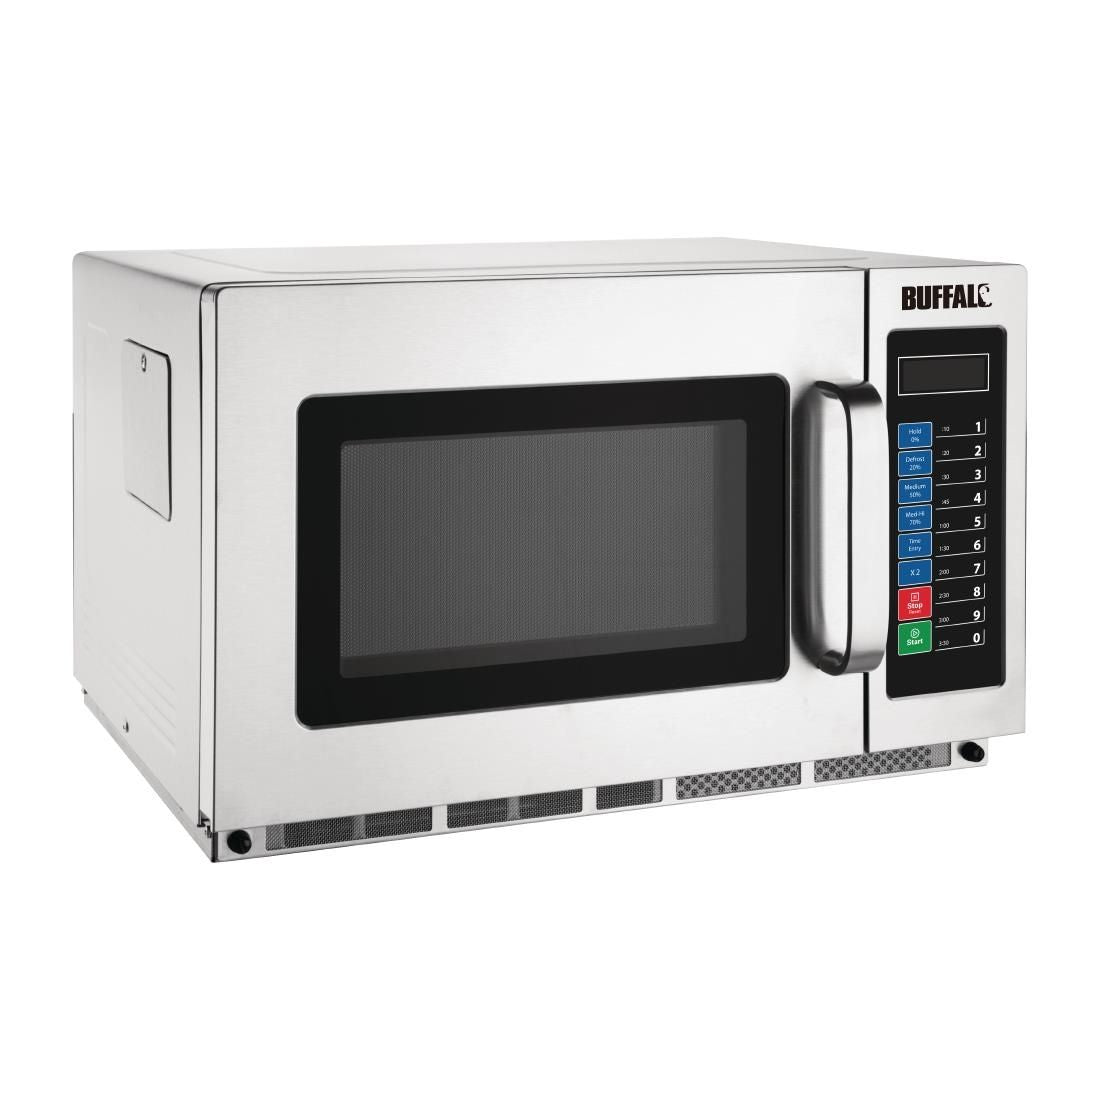 FB864 Buffalo Programmable Commercial Microwave Oven 34ltr 1800W JD Catering Equipment Solutions Ltd